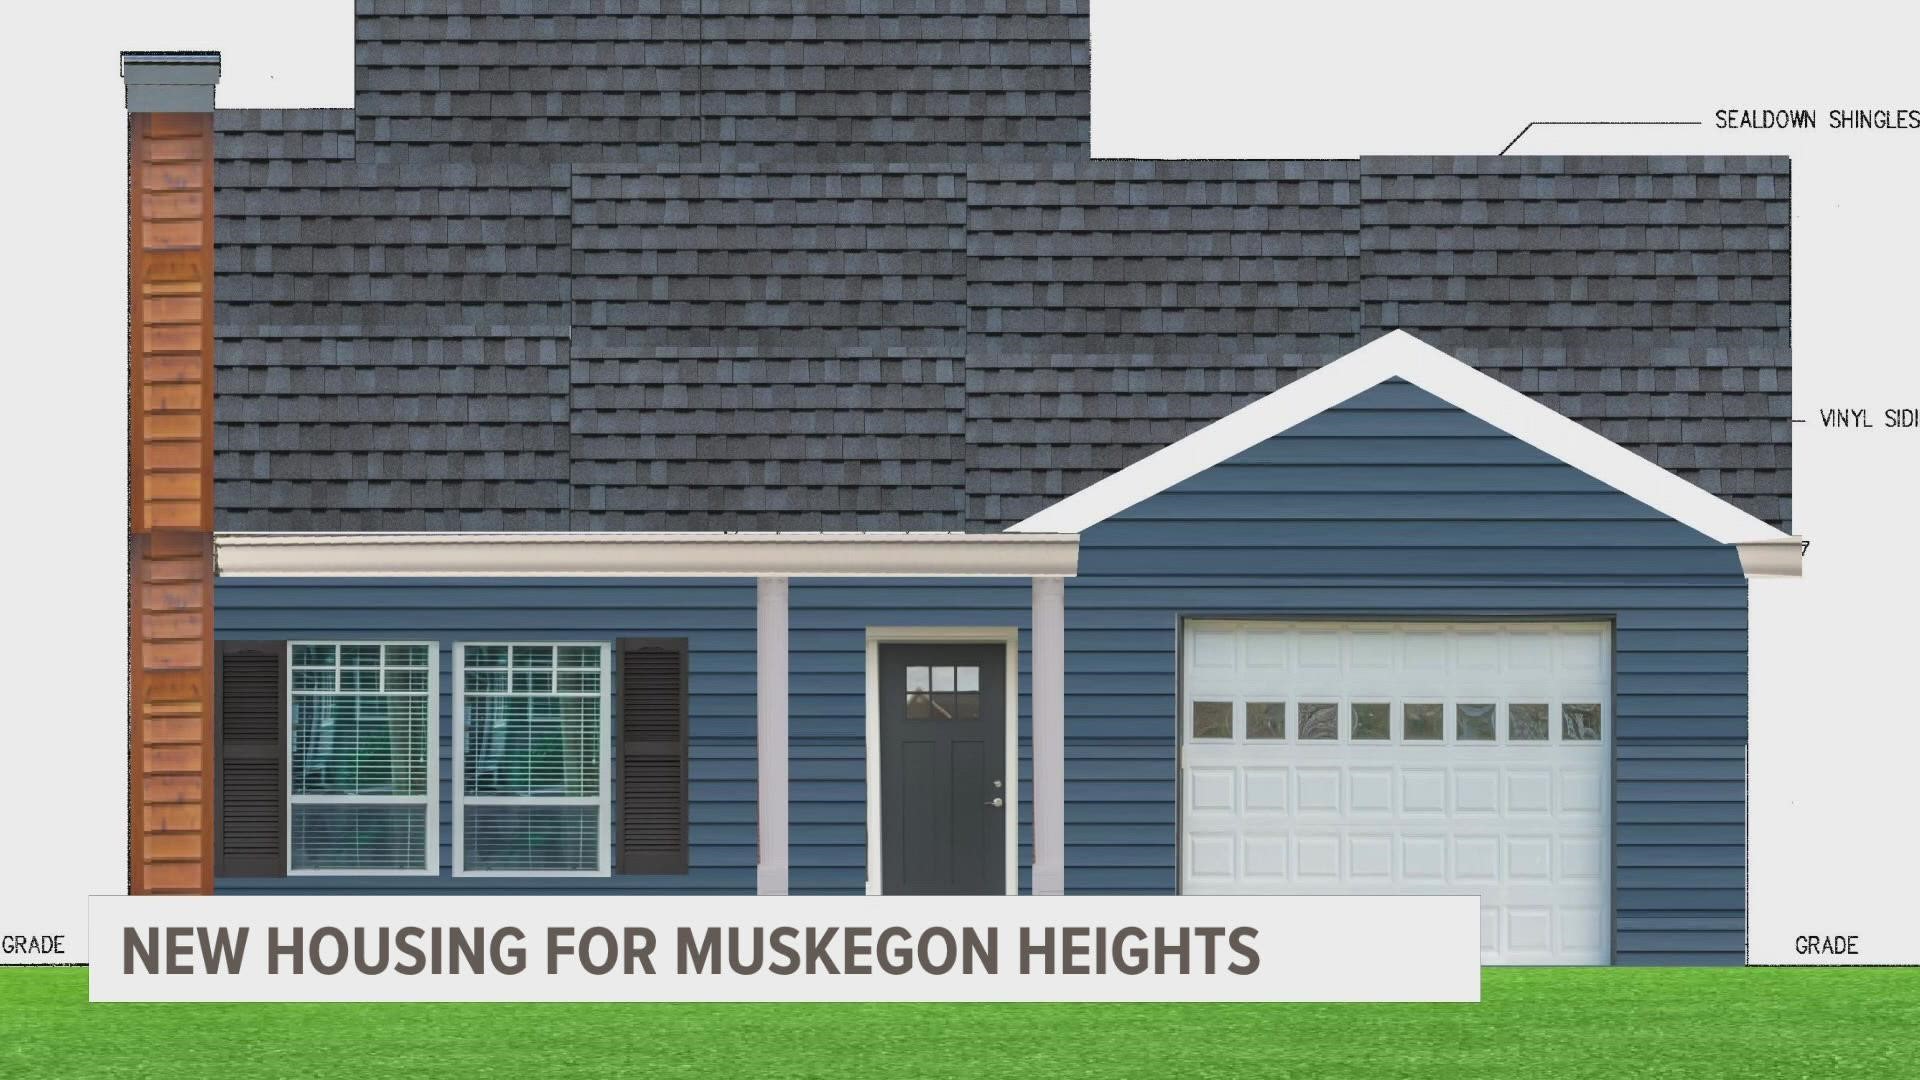 The program promises to bring some of the first new homes to Muskegon Heights in years.